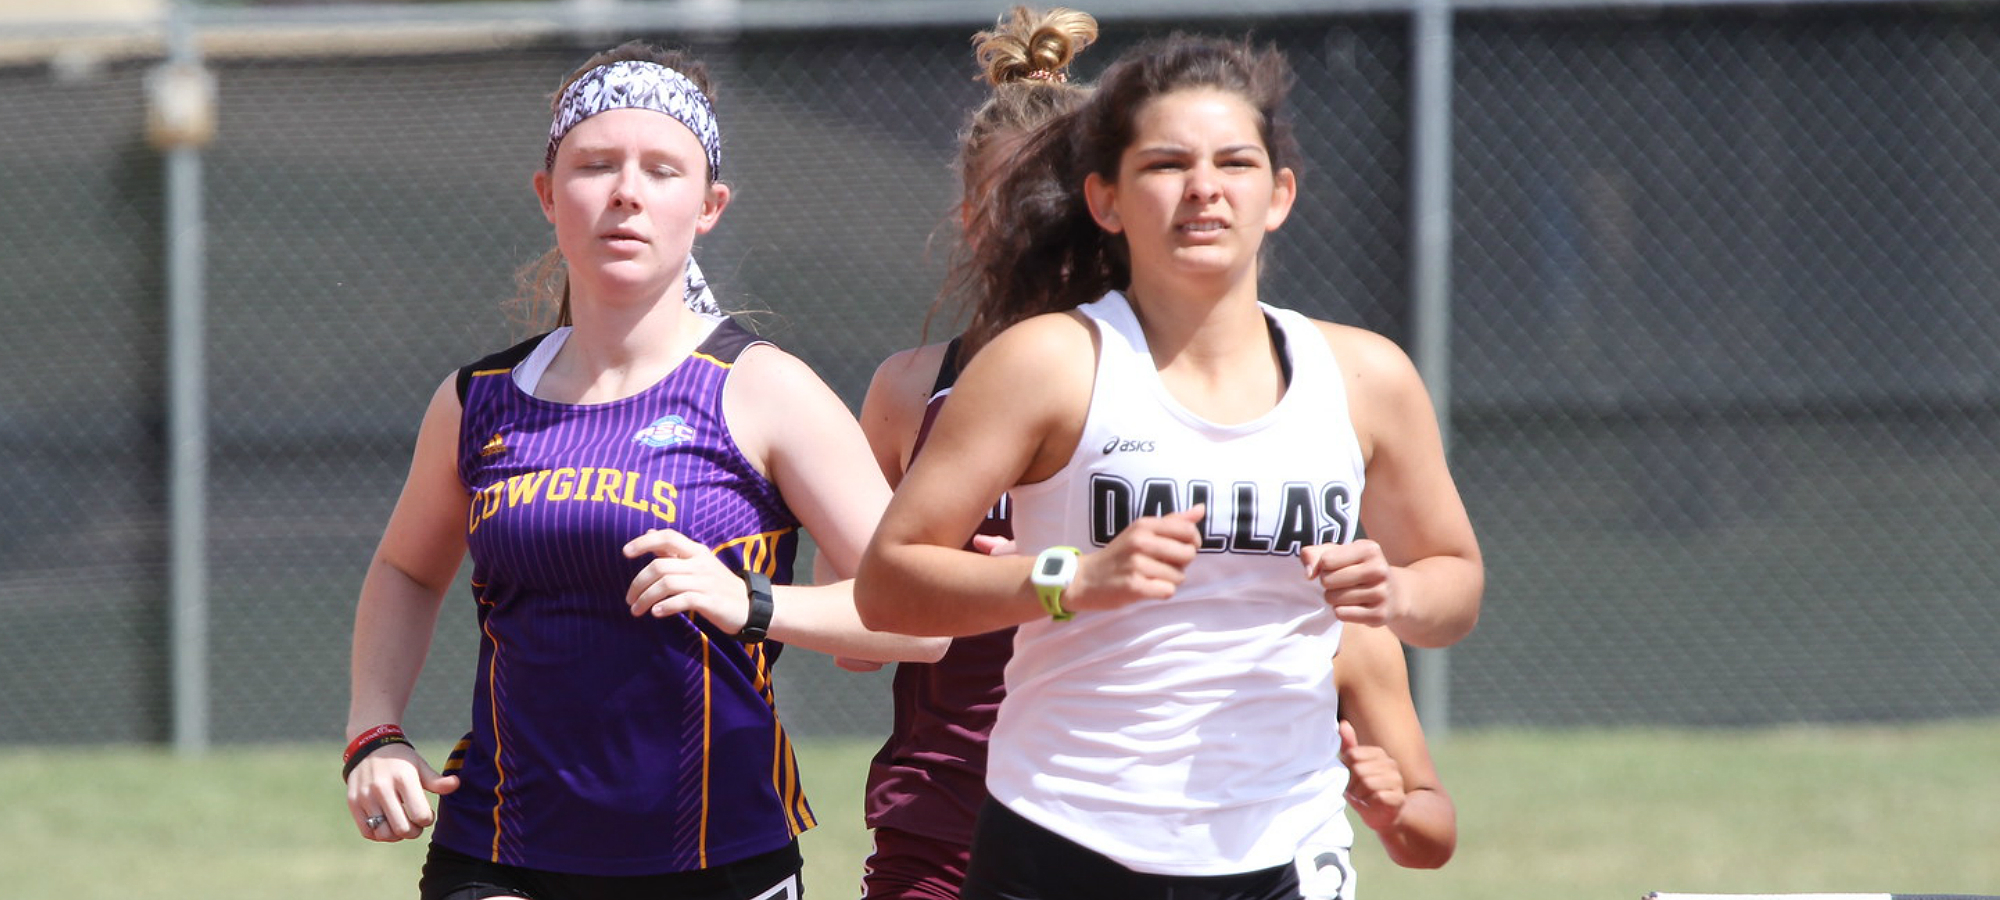 Women's Track and Field Results at War Hawk Classic